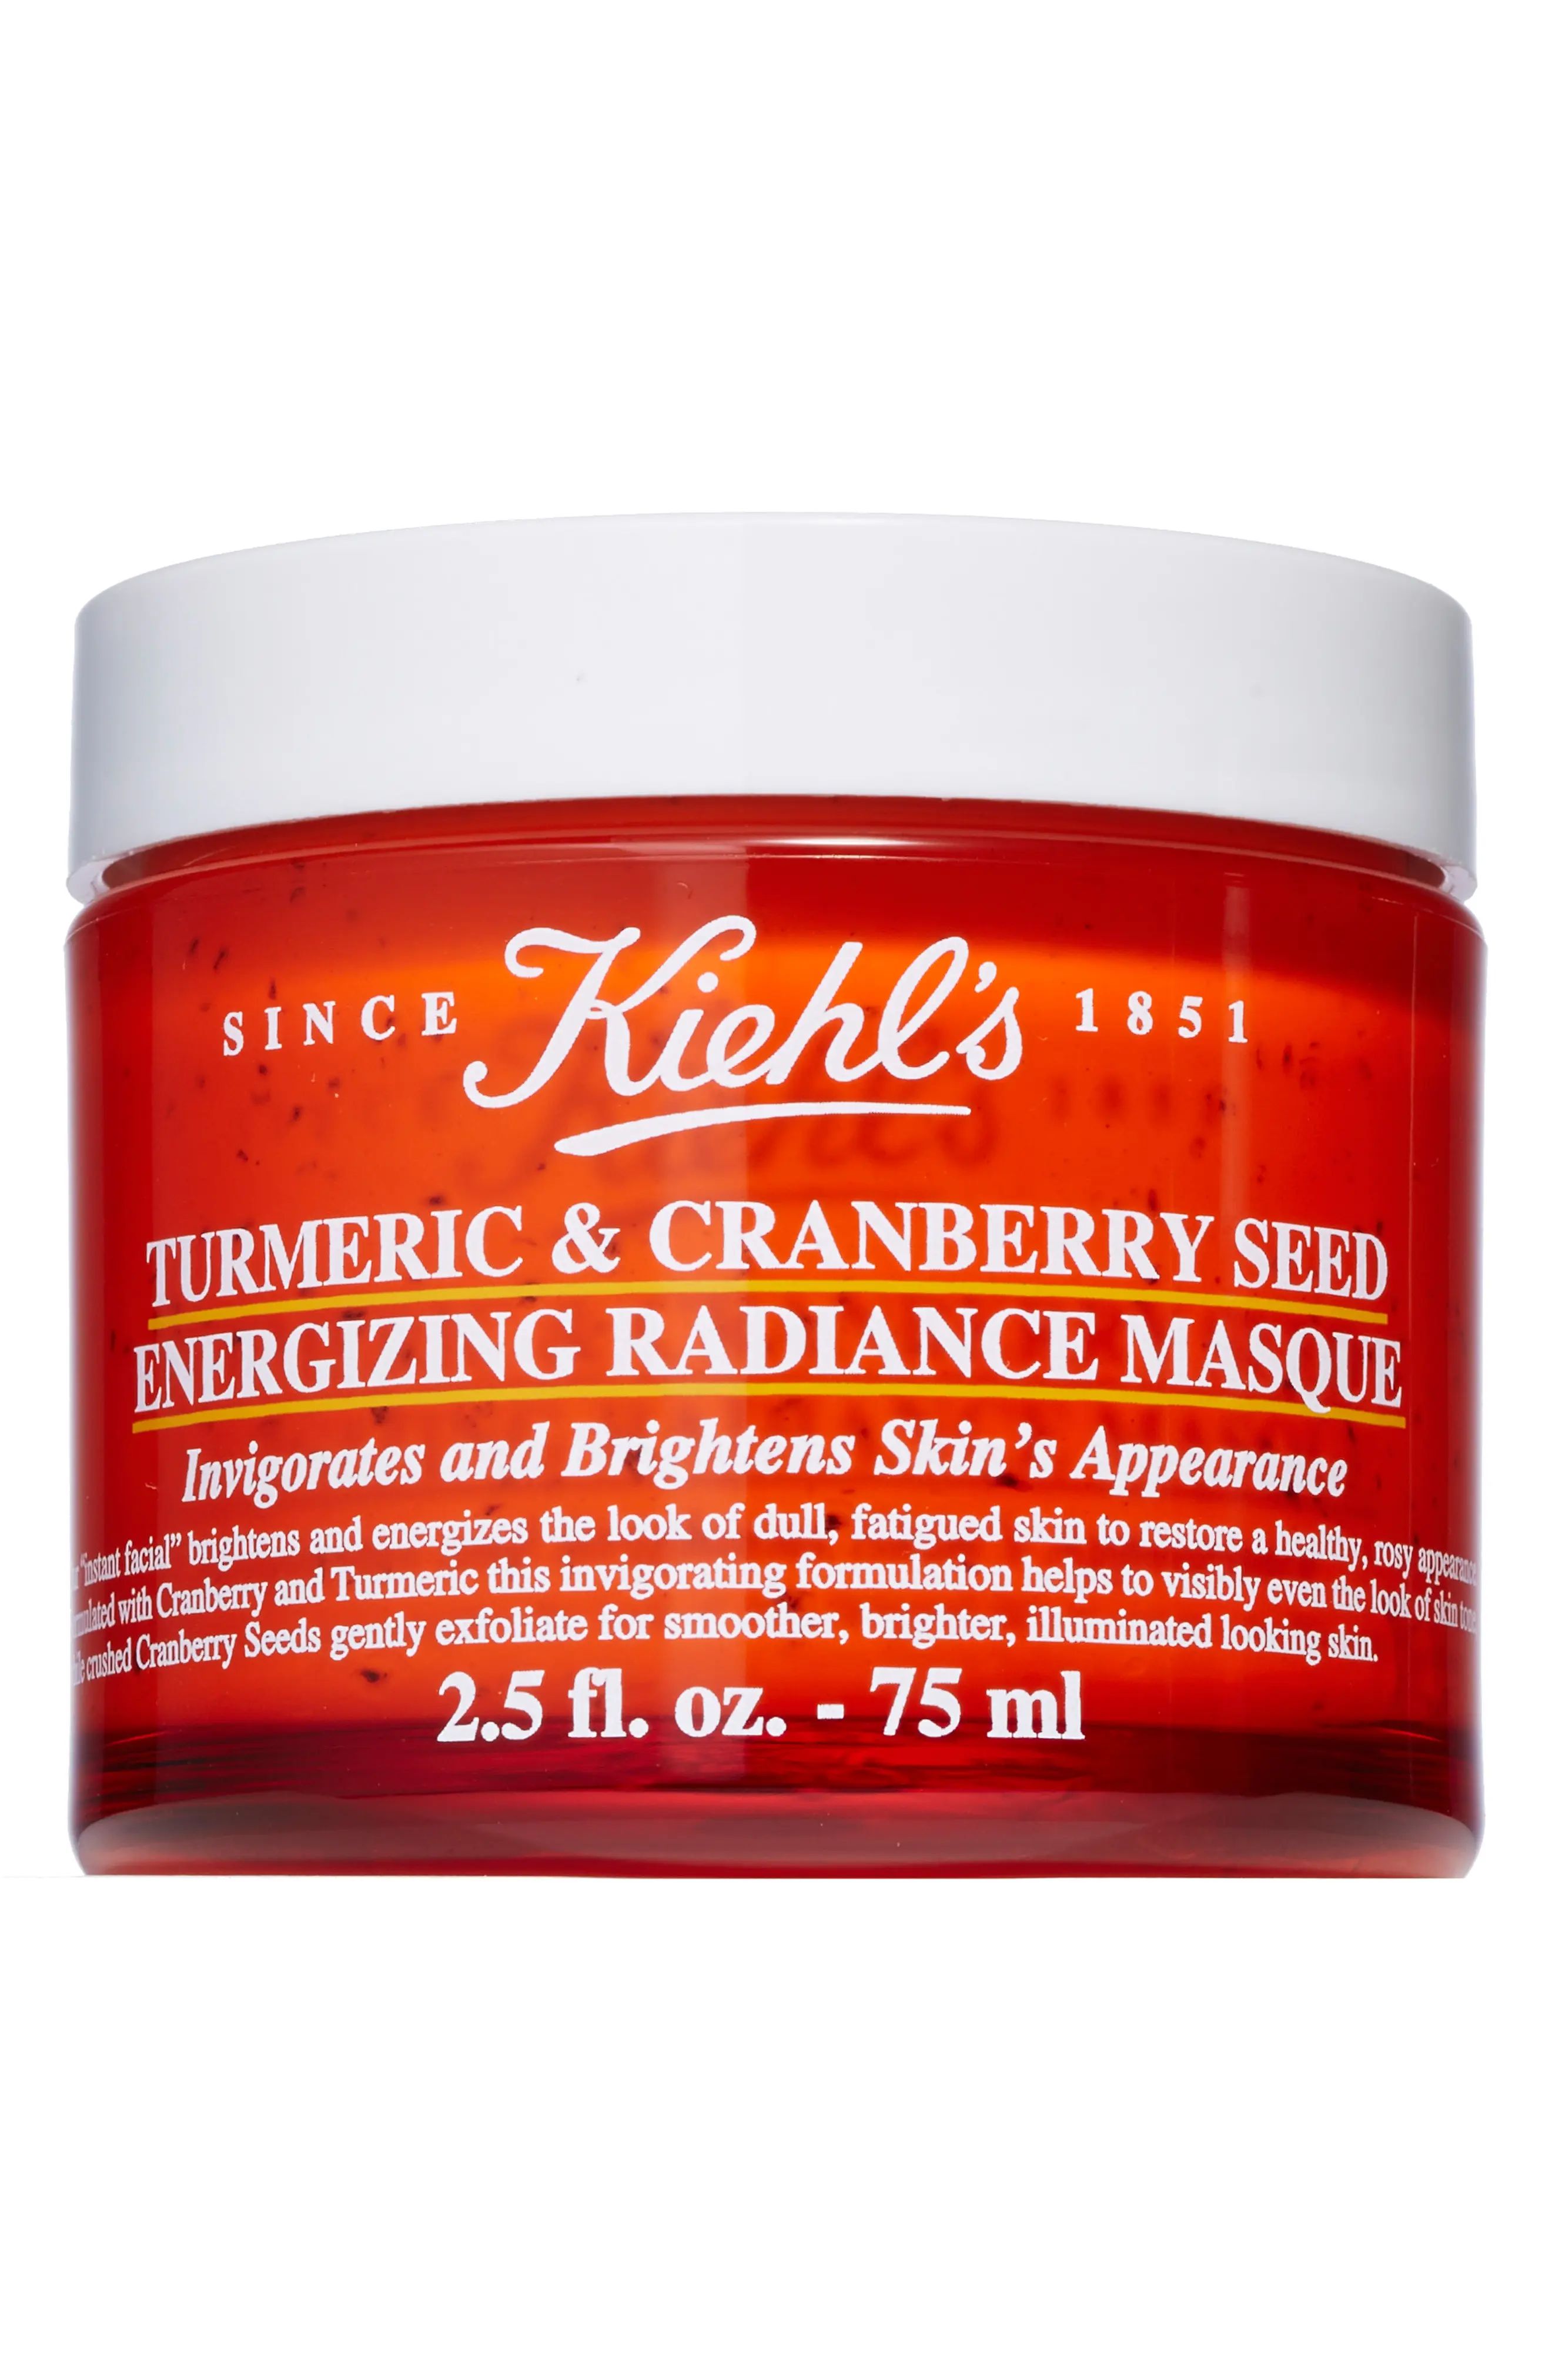 Turmeric & Cranberry Seed Energizing Radiance Masque | Nordstrom